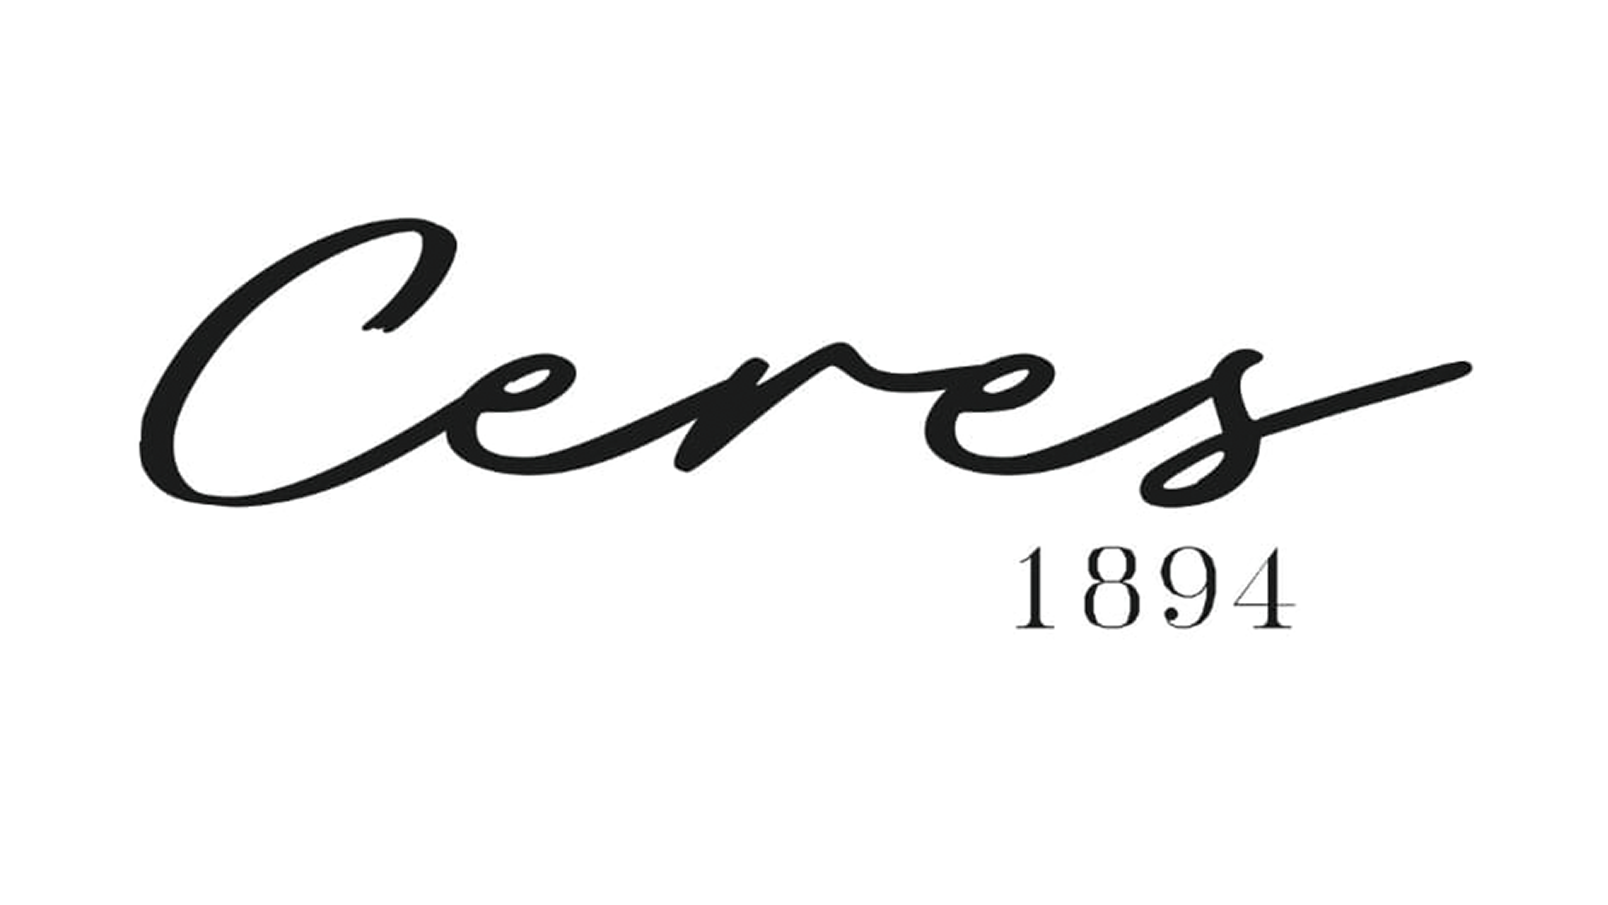 Ceres 1894. Ourense.